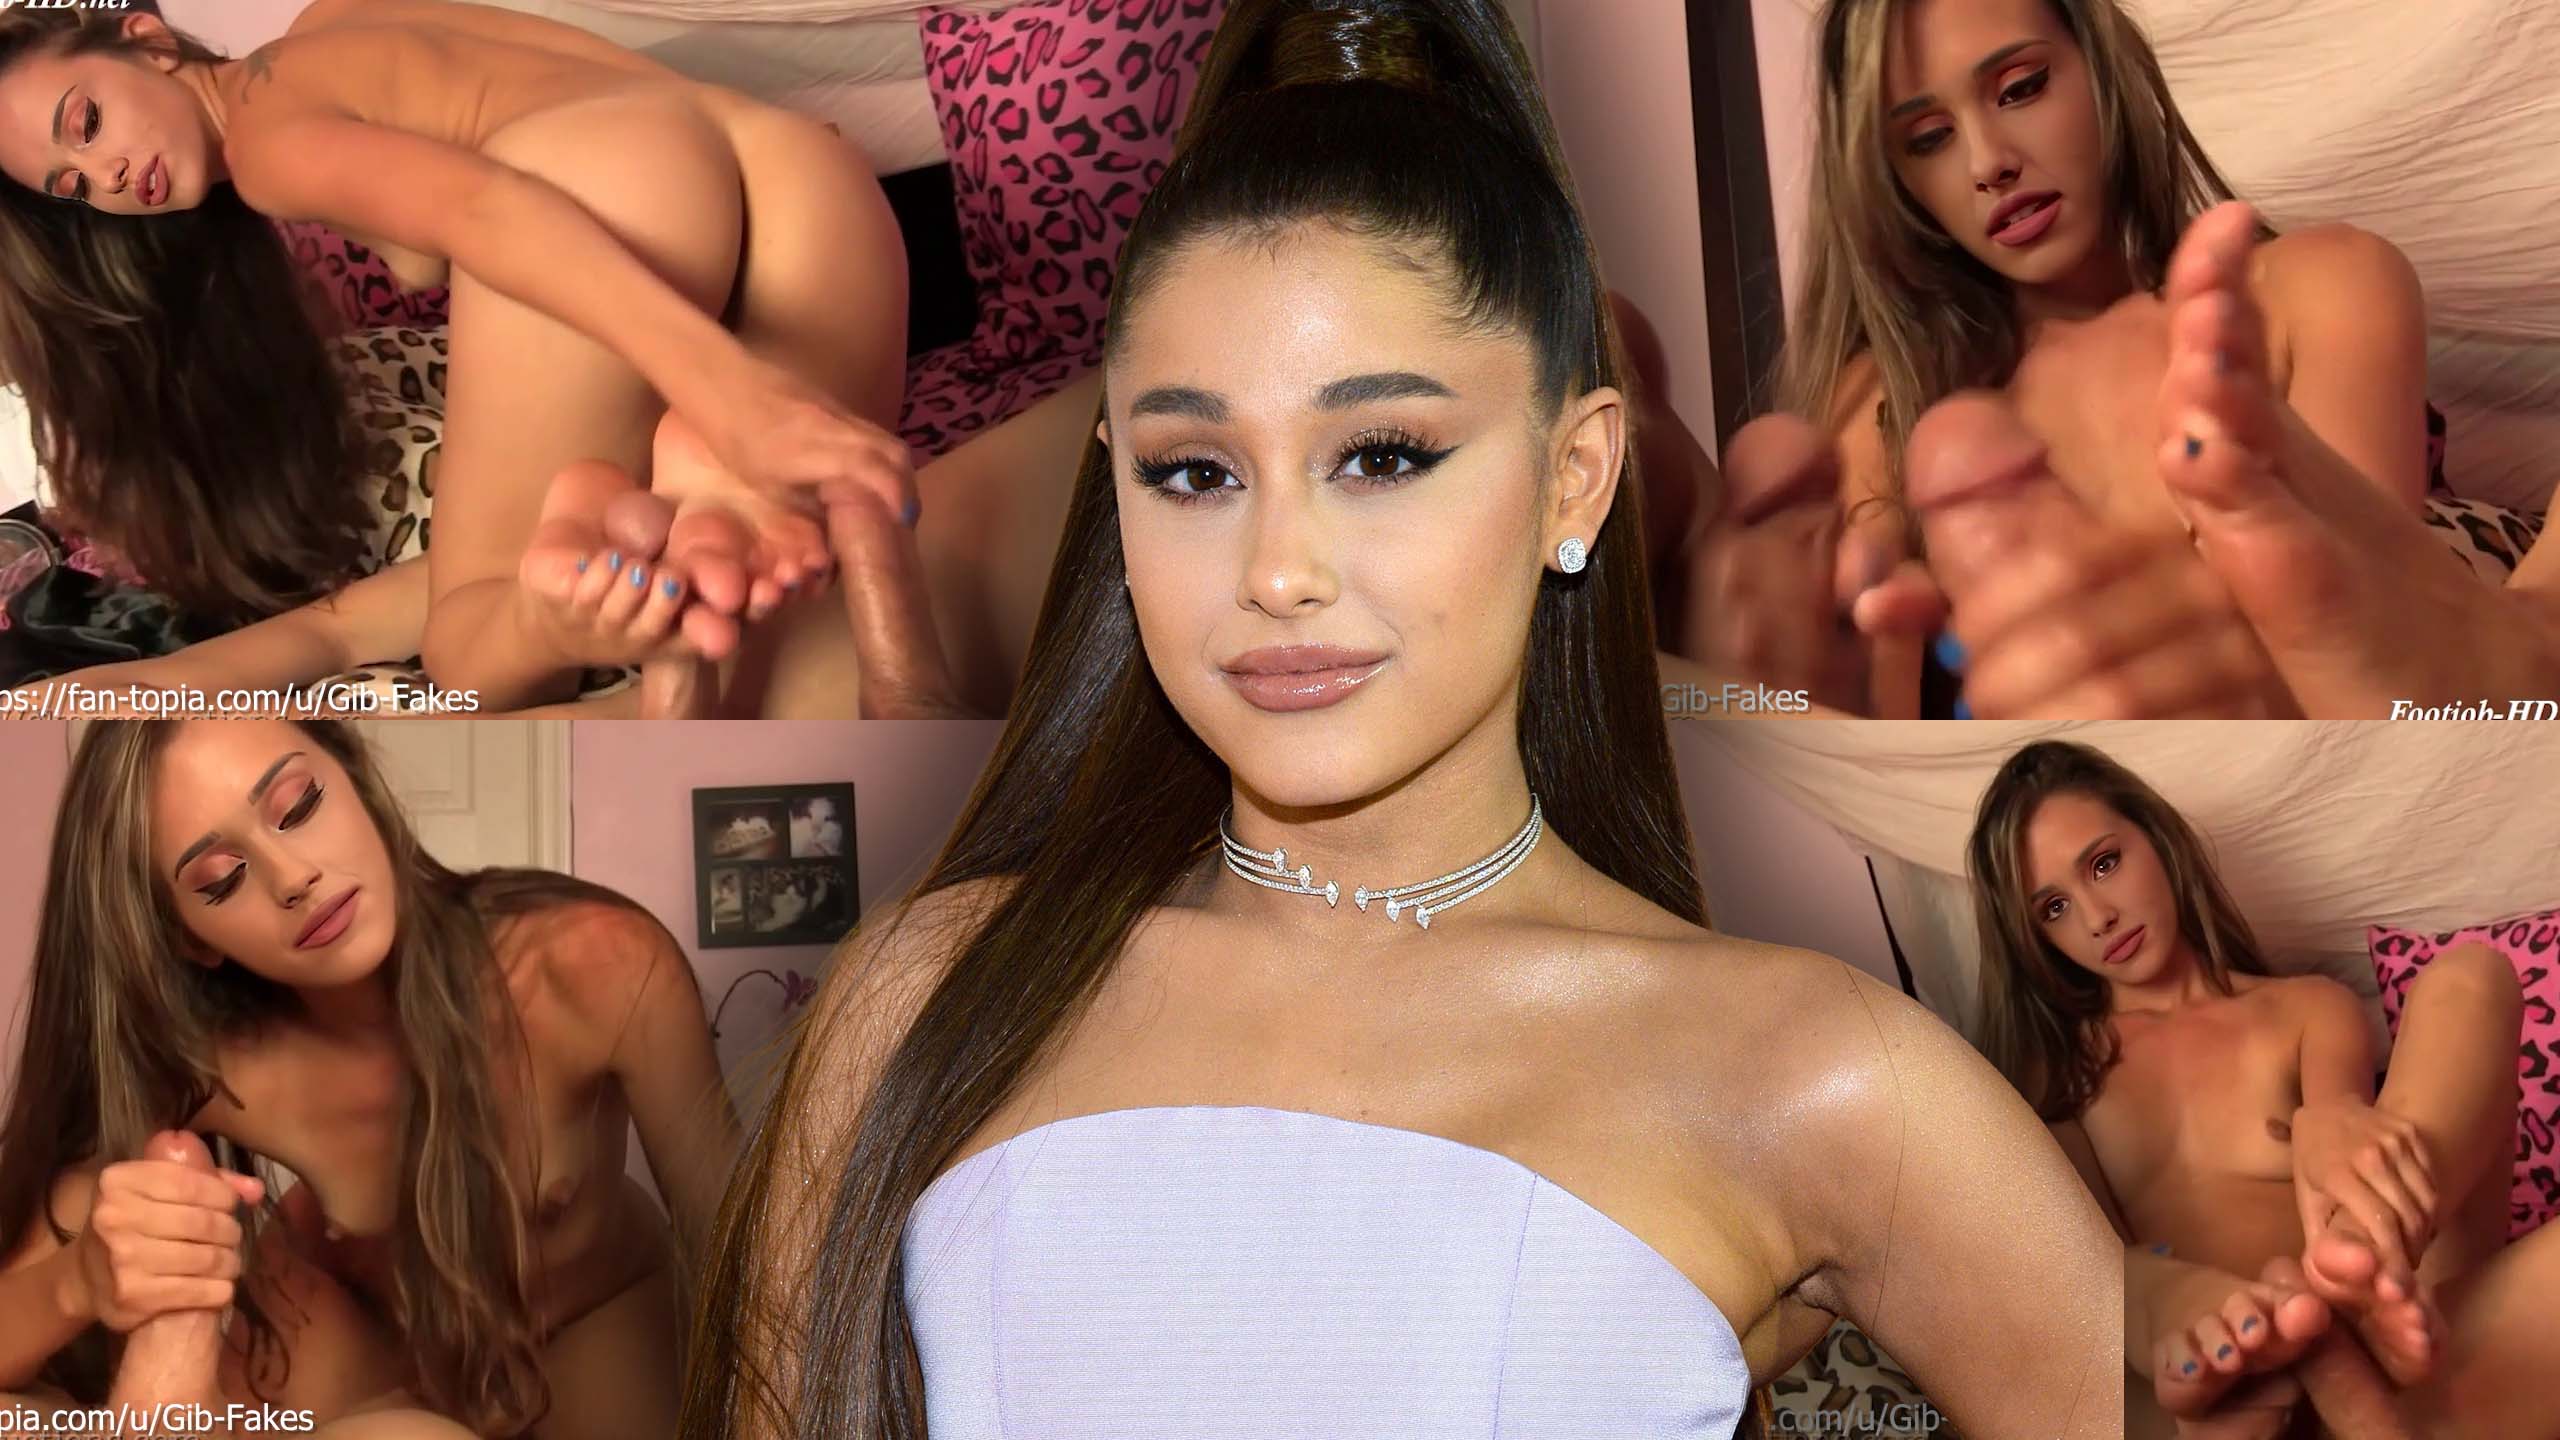 Ariana Compilation - Ariana Grande Rubs Two Cocks Together With Her Feet Until They Explode  DeepFake Porn - MrDeepFakes